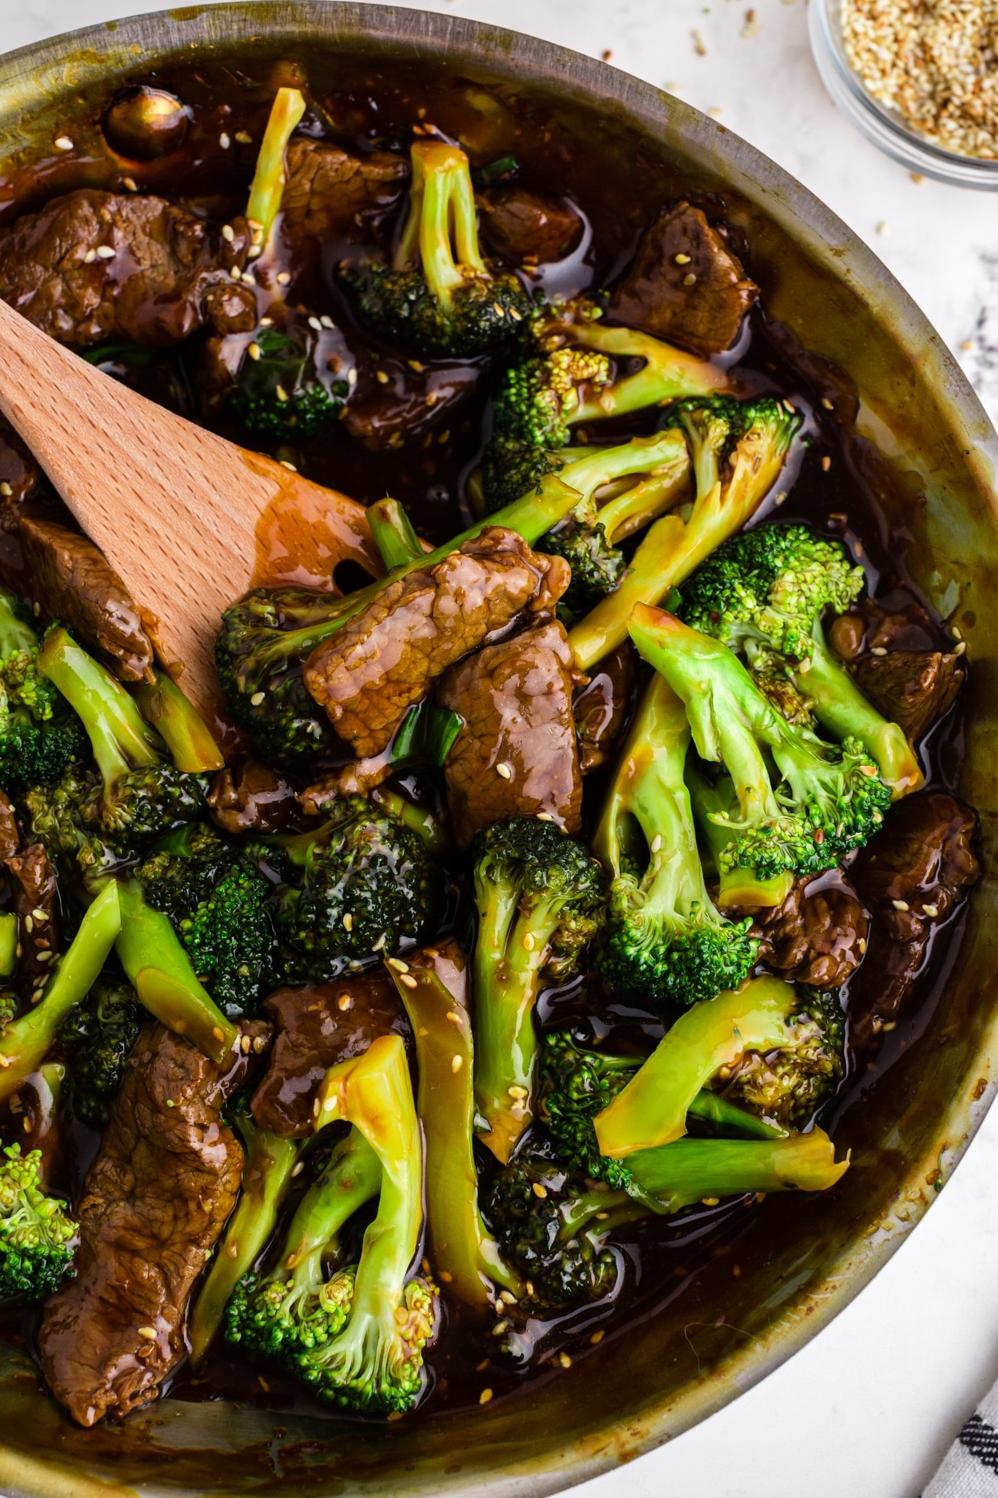  Broccoli, a colorful vegetable to complement the appetizing beef and wine medley.